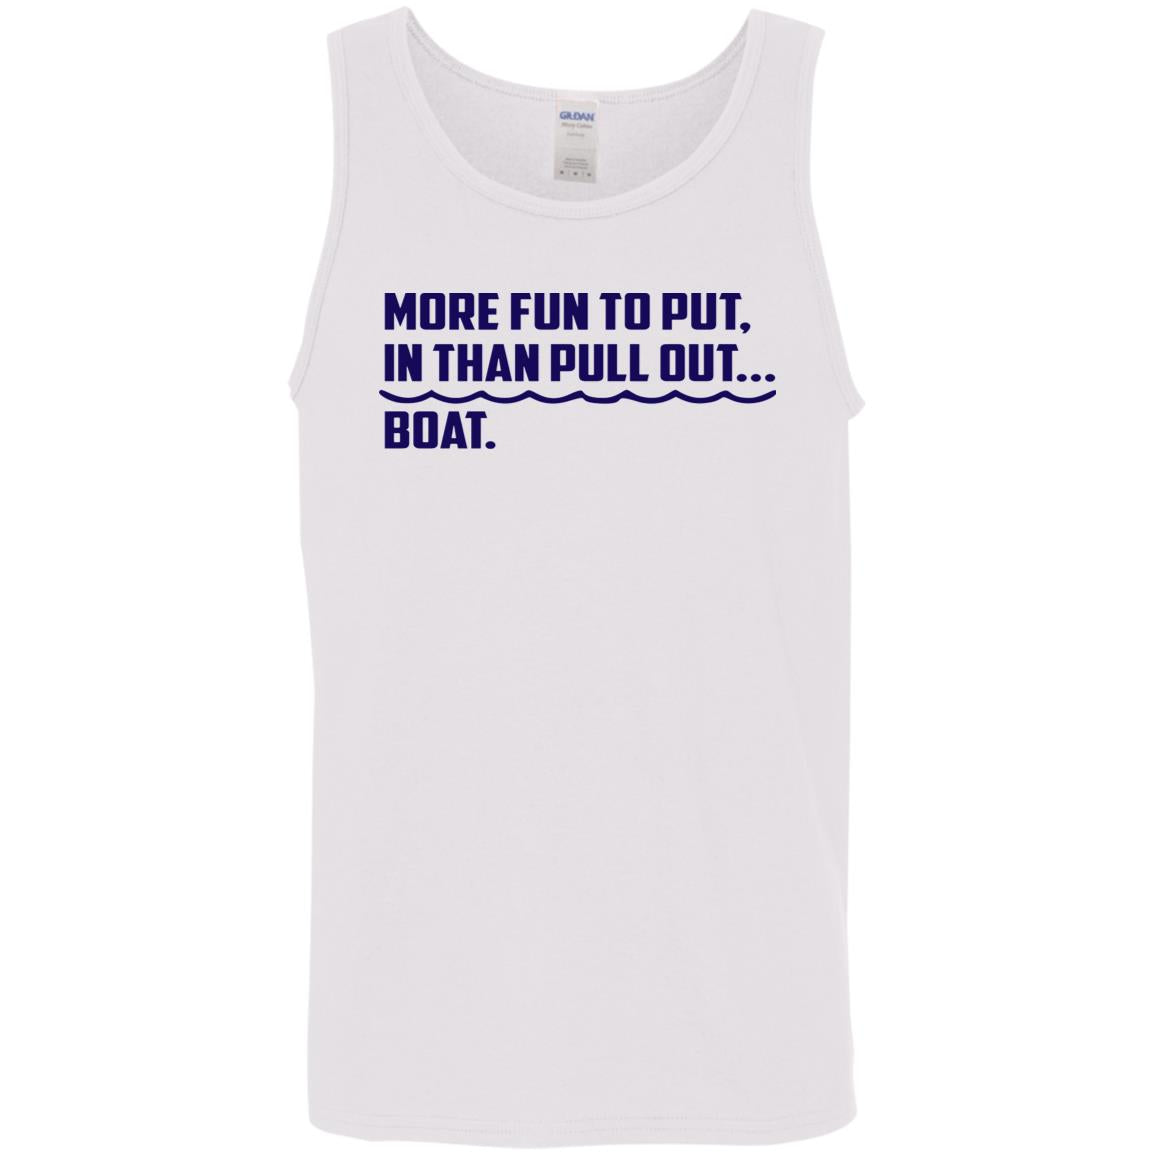 HRCL FL - Navy More Fun To Put In Than Pull Out - 2 Sided G520 Cotton Tank Top 5.3 oz.